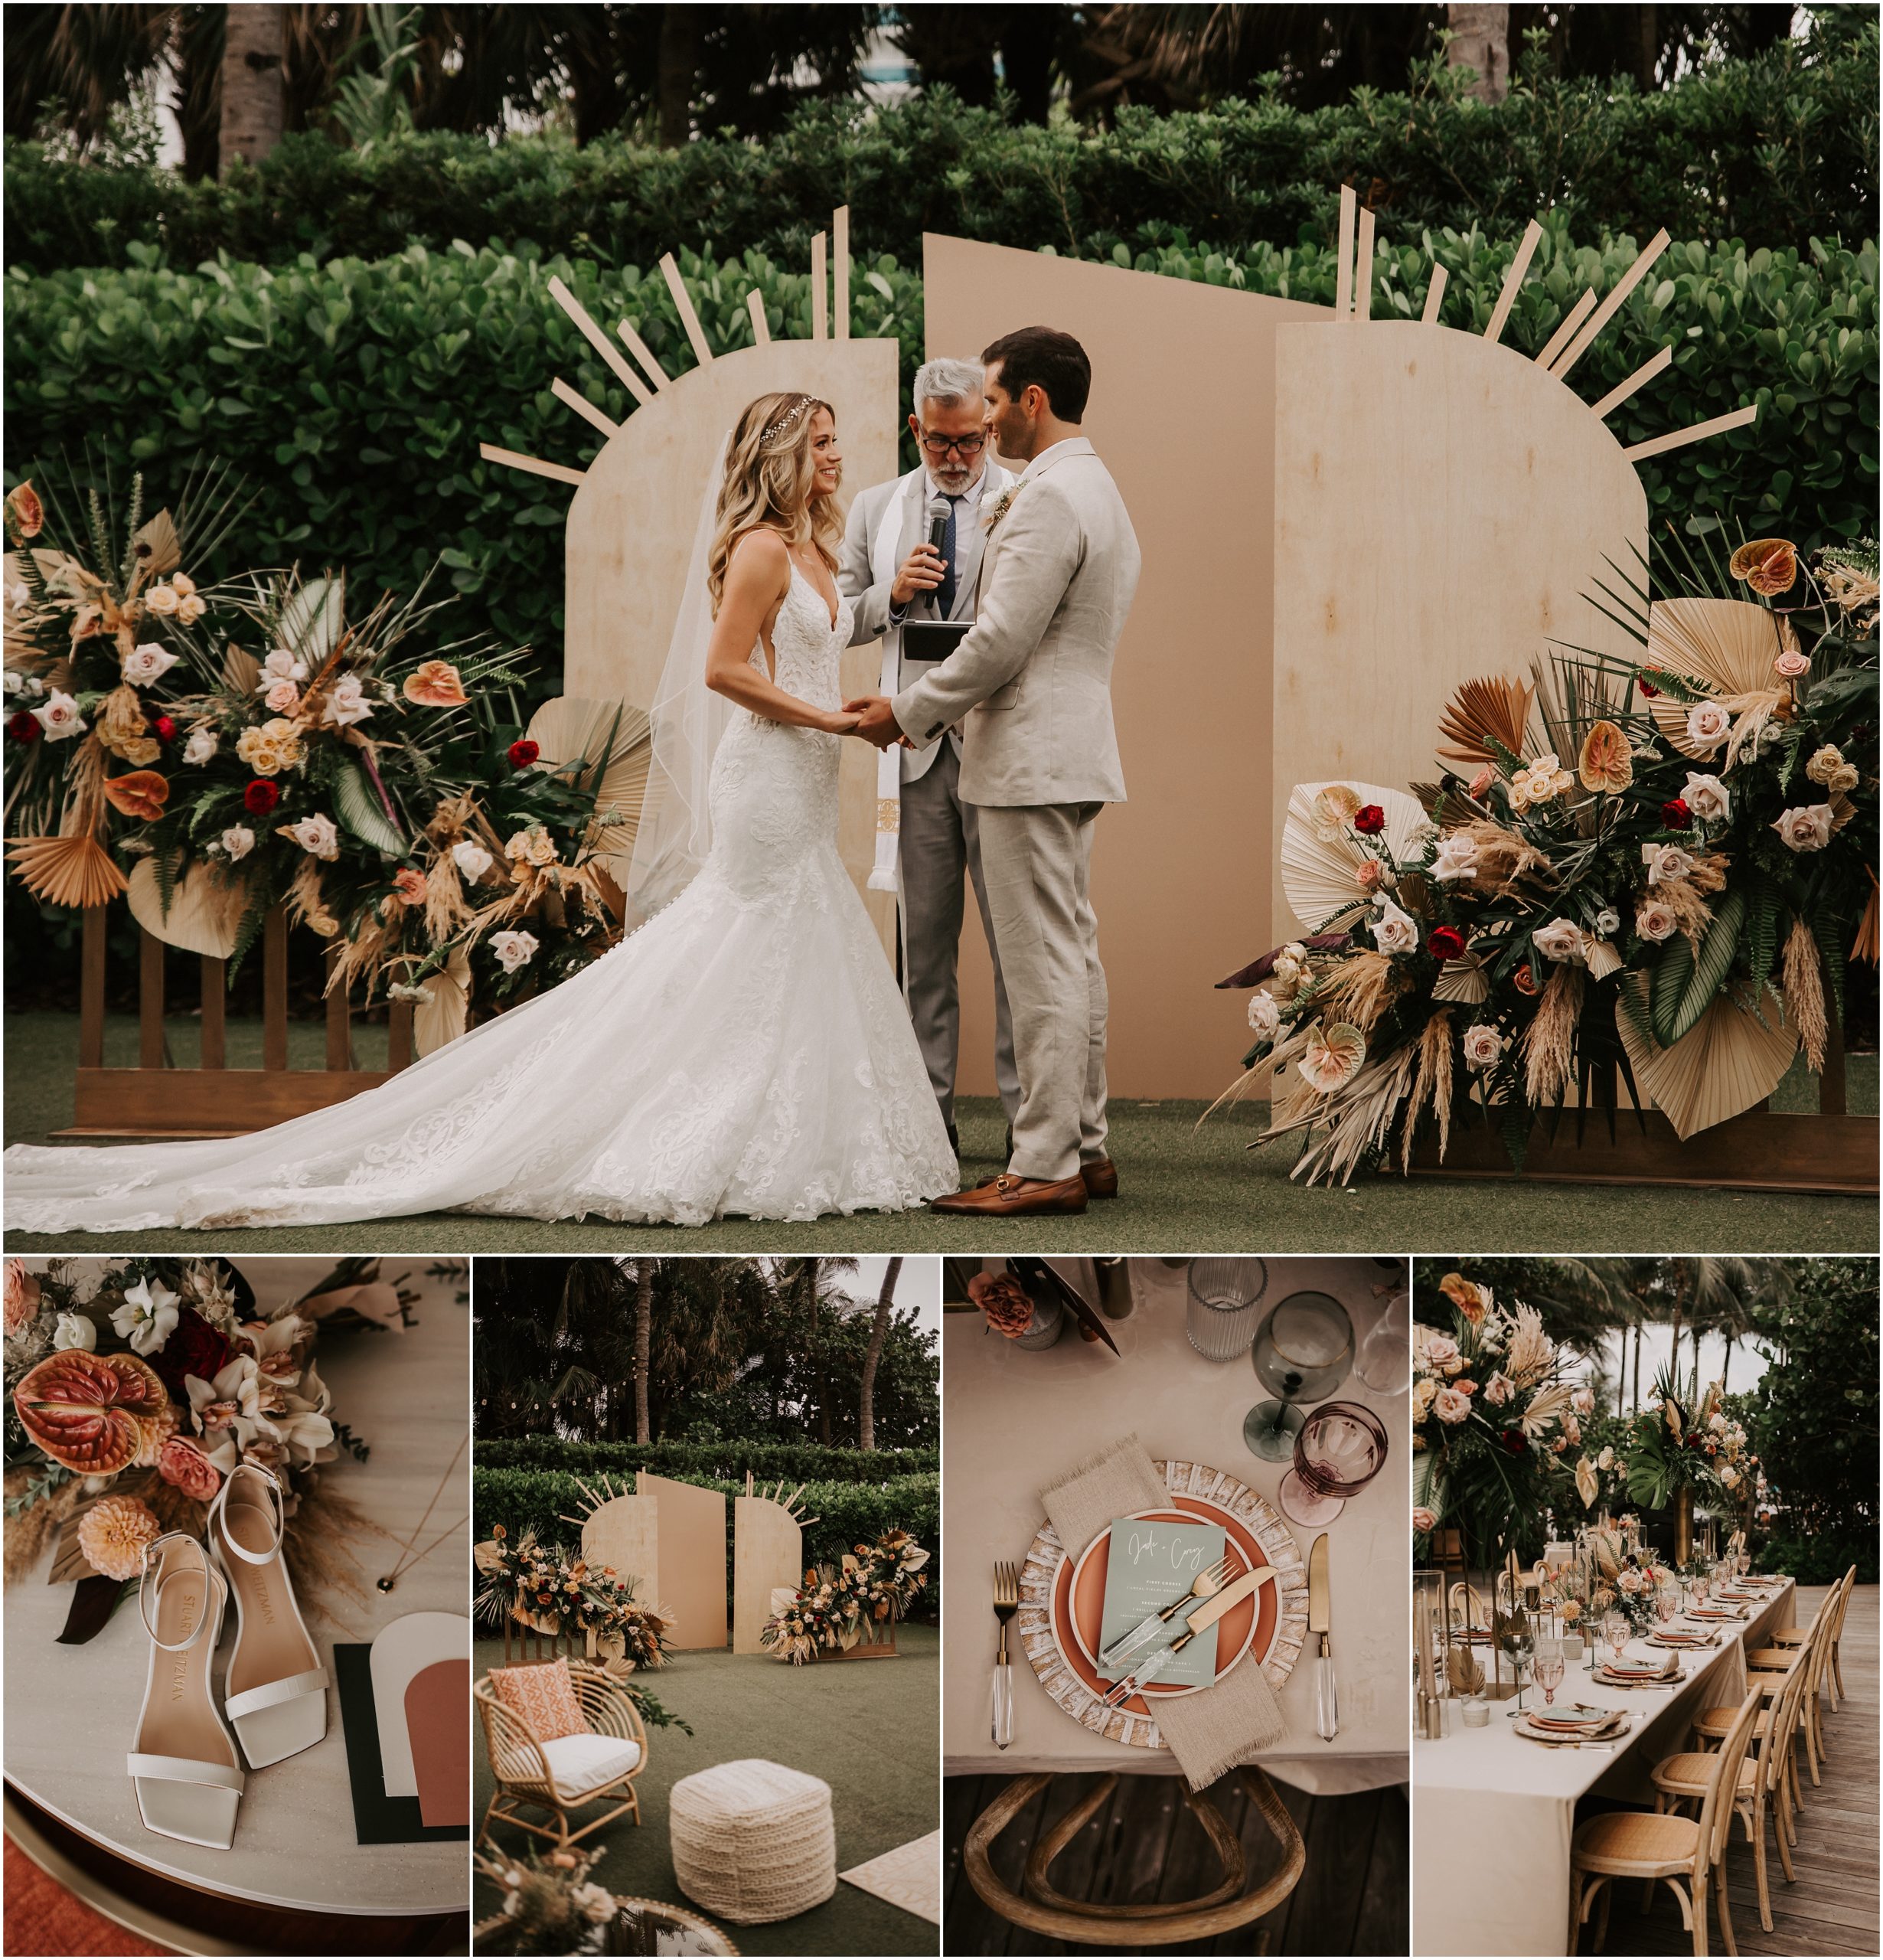 Jade & Corey's Destination Wedding in Miami was back on June 26, 2021 at the W Hotel in South Beach. This is one of the best cities to host your wedding celebration due to its white sandy beaches and cotton candy skies, which creates a fairy-tale like background for your day!